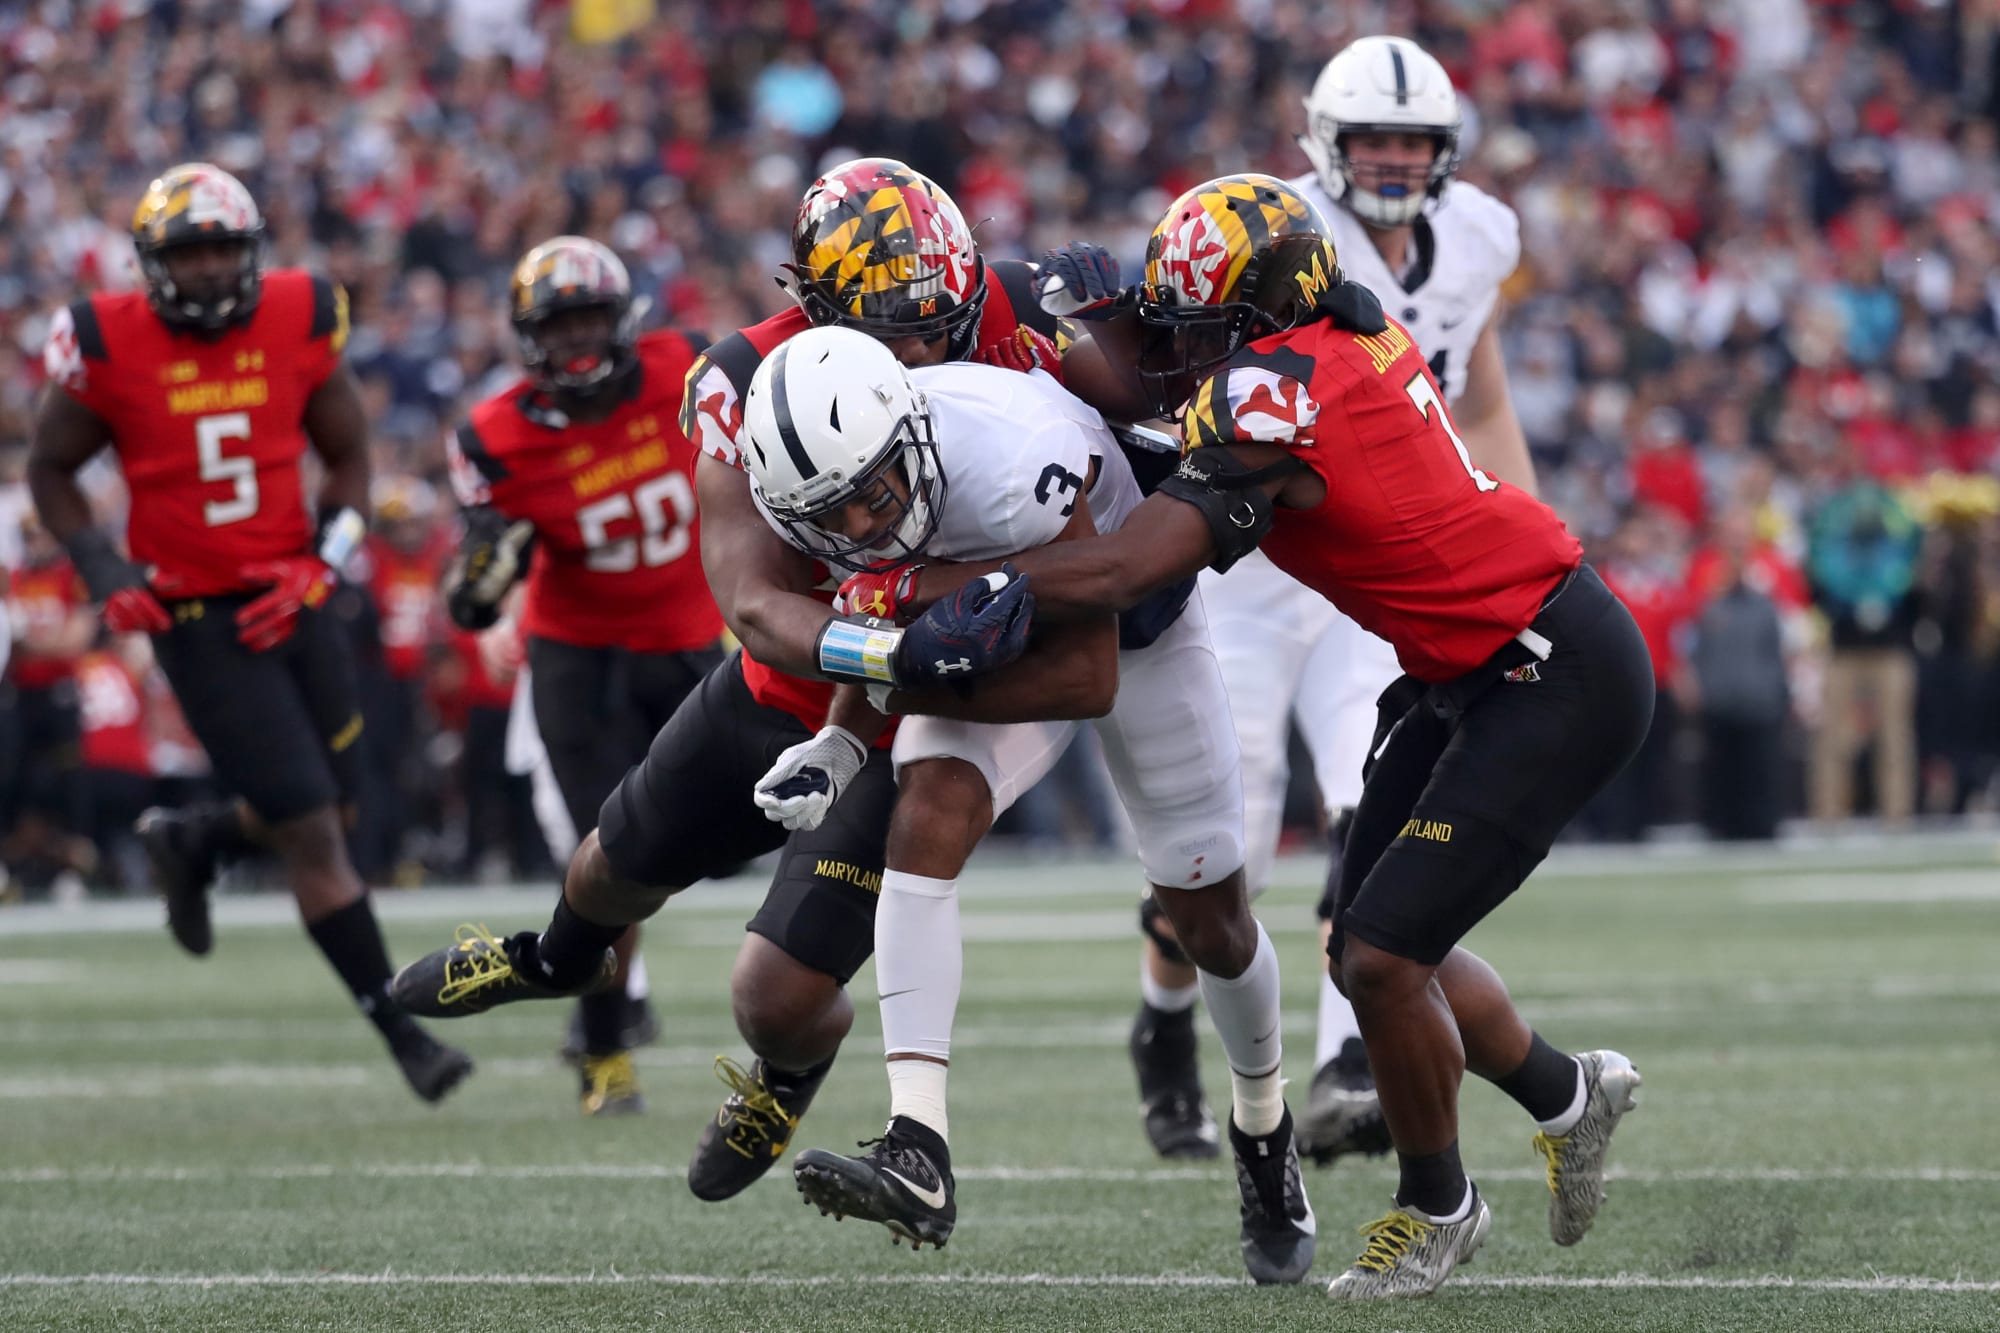 2018 NFL Draft Scouting Report for Maryland's JC Jackson